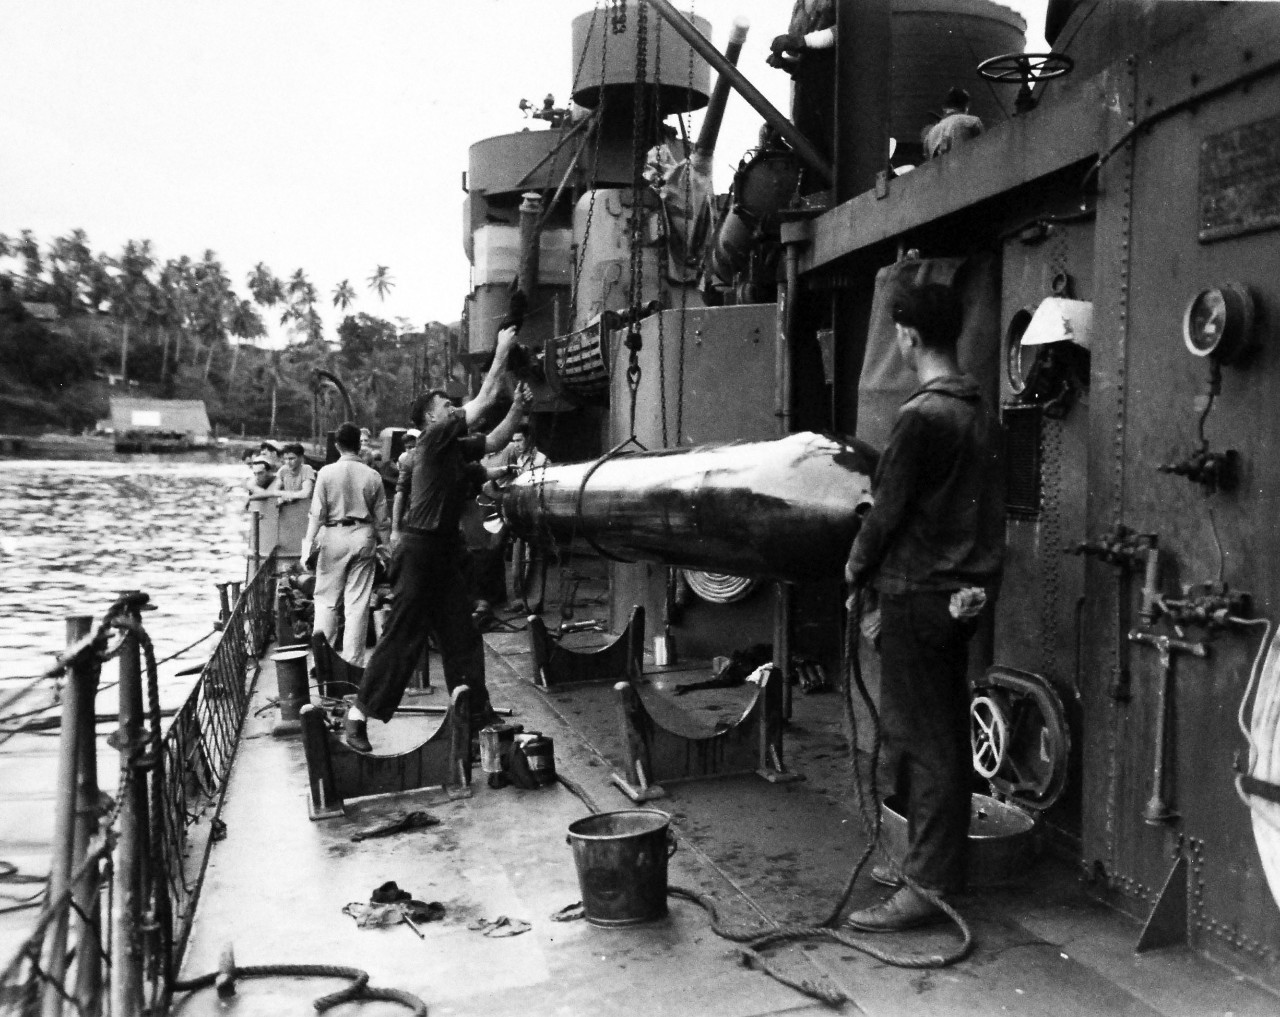 80-G-57599:  Battle of Kula Gulf, July 5-6, 1943.  Hoisting torpedoes on board USS Nicholas (DD-449) at Tulagi, after her others had been spent during the battle.   Photographed by CPU-2, July 12-13, 1943.  Official U.S. Navy Photograph, now in the collections of the National Archives.  (2016/6/2). 